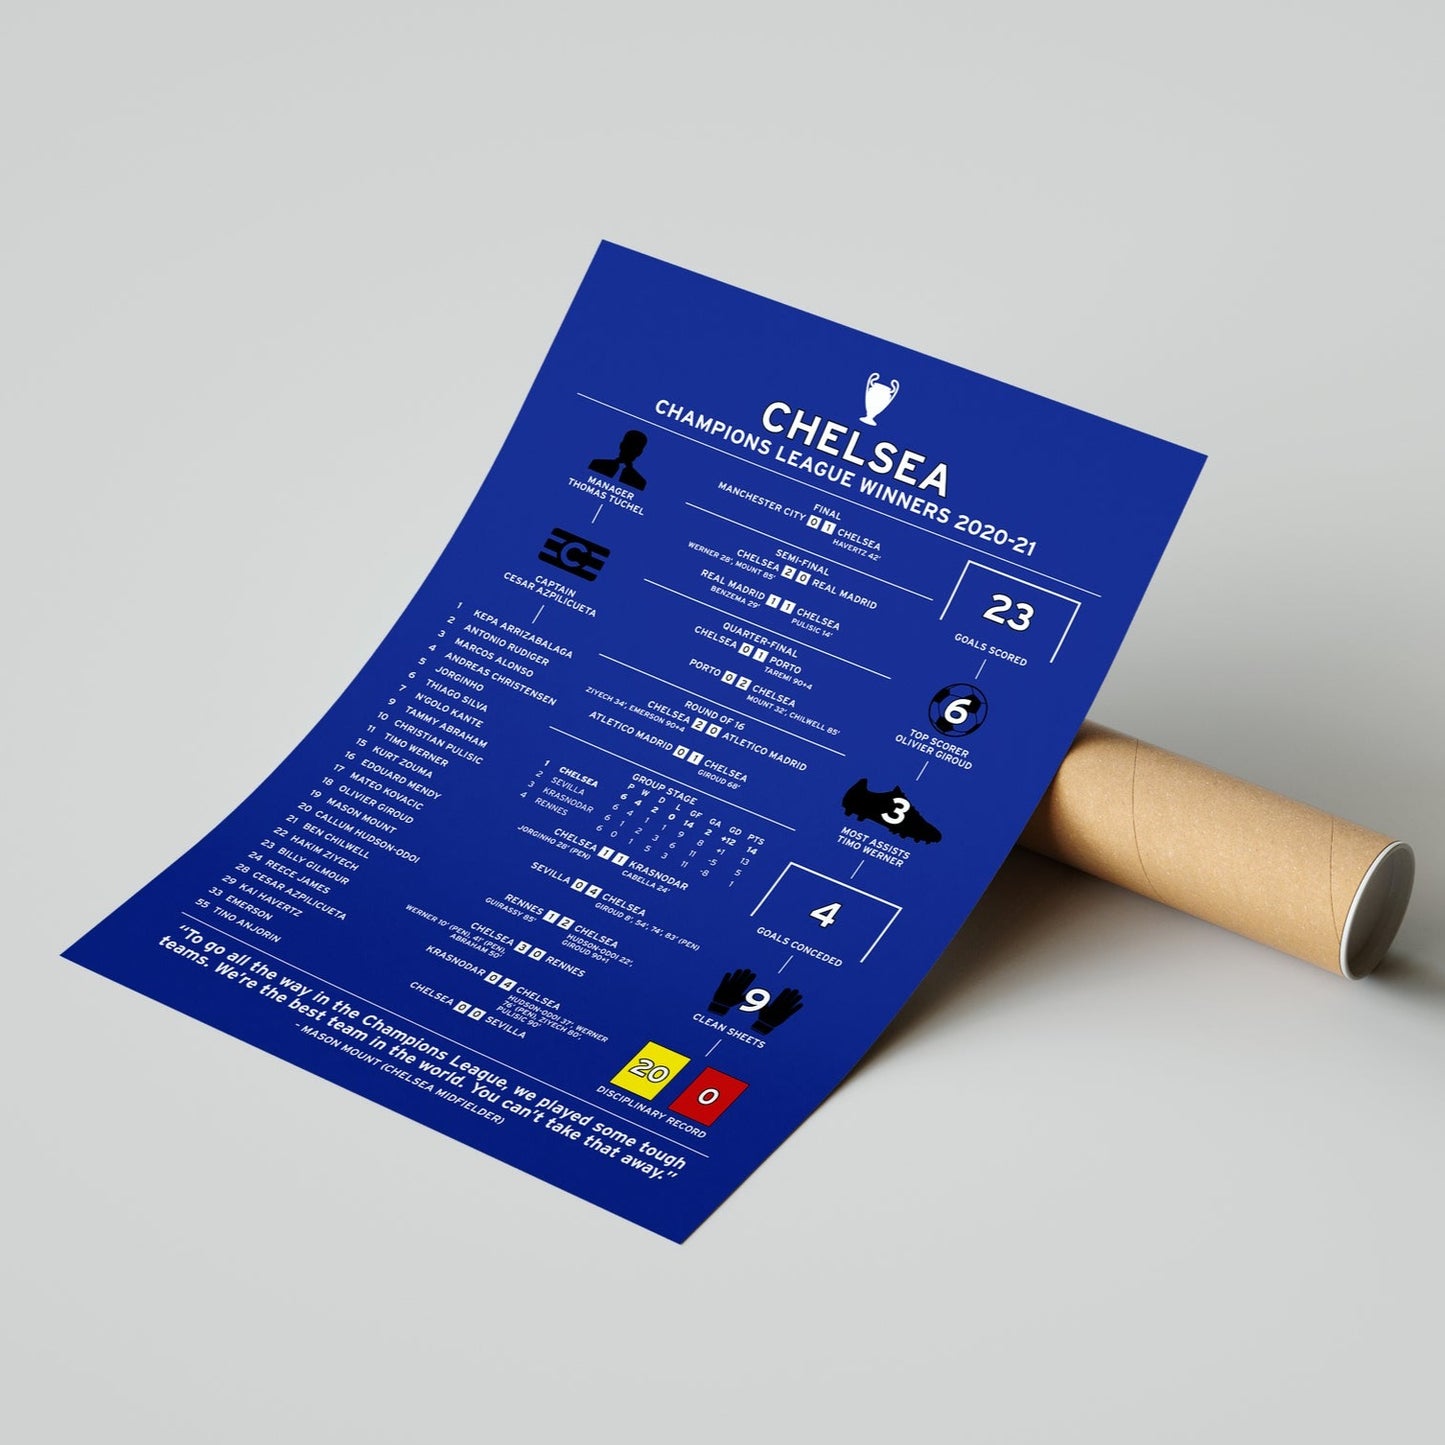 Chelsea 2020-21 Champions League Winning Poster